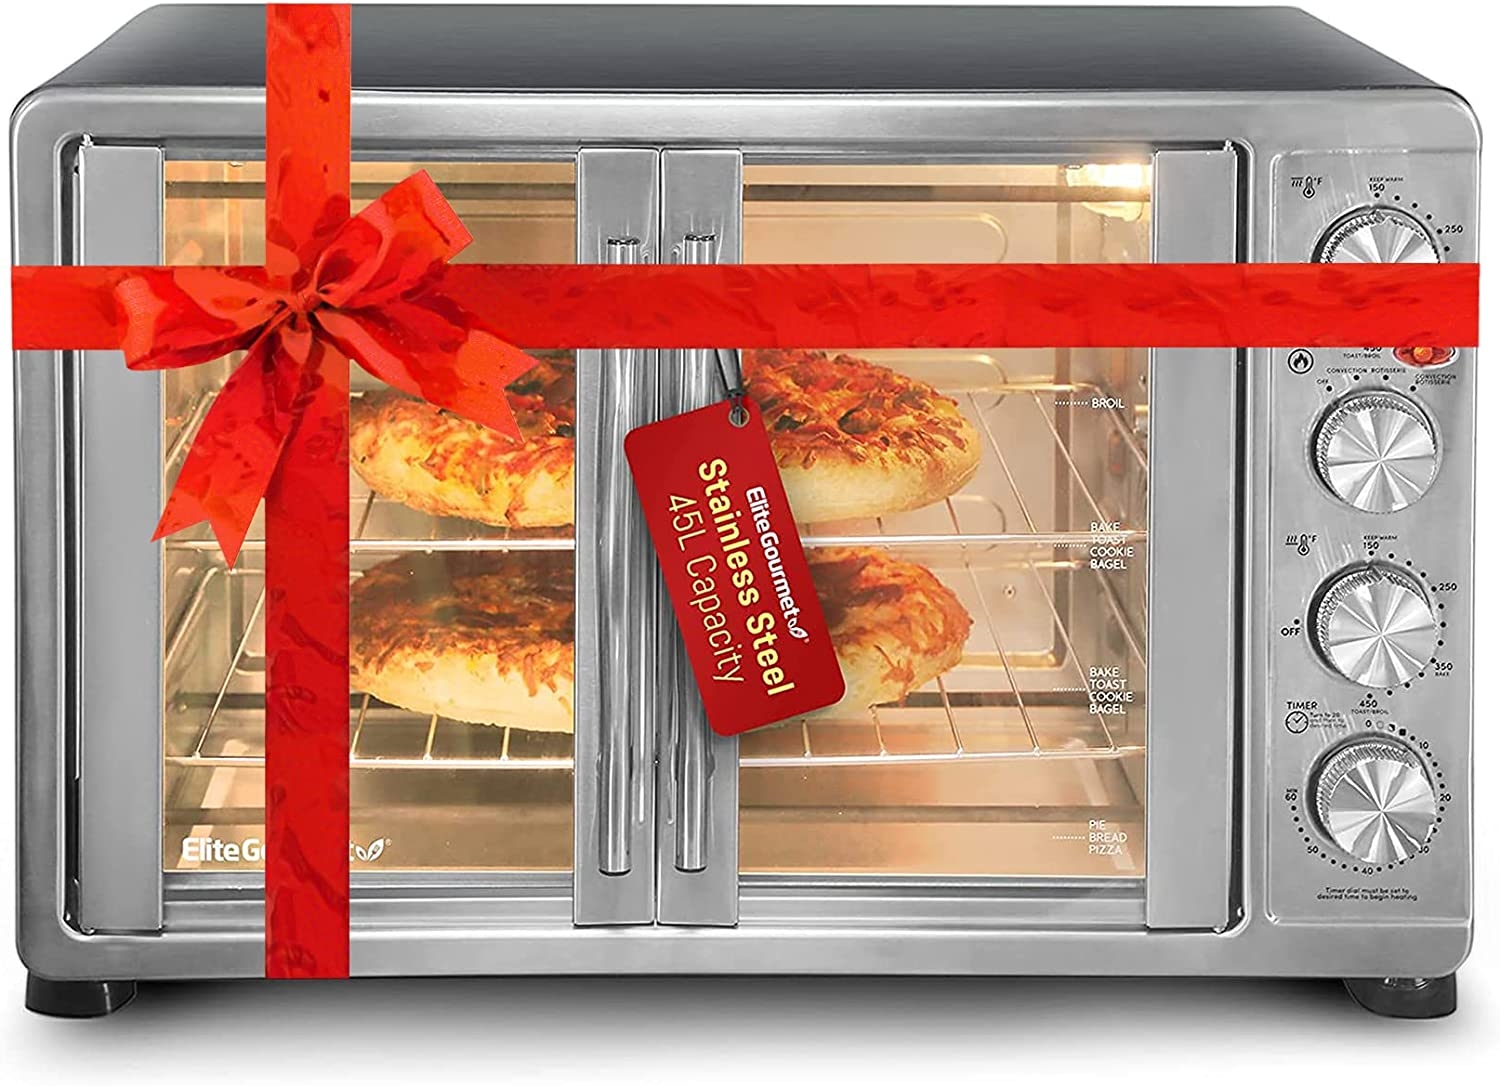 Elite Gourmet ETO4510B French Door 47.5Qt, 18-Slice Convection Oven 4-Control Knobs, Bake Broil Toast Rotisserie Keep Warm,